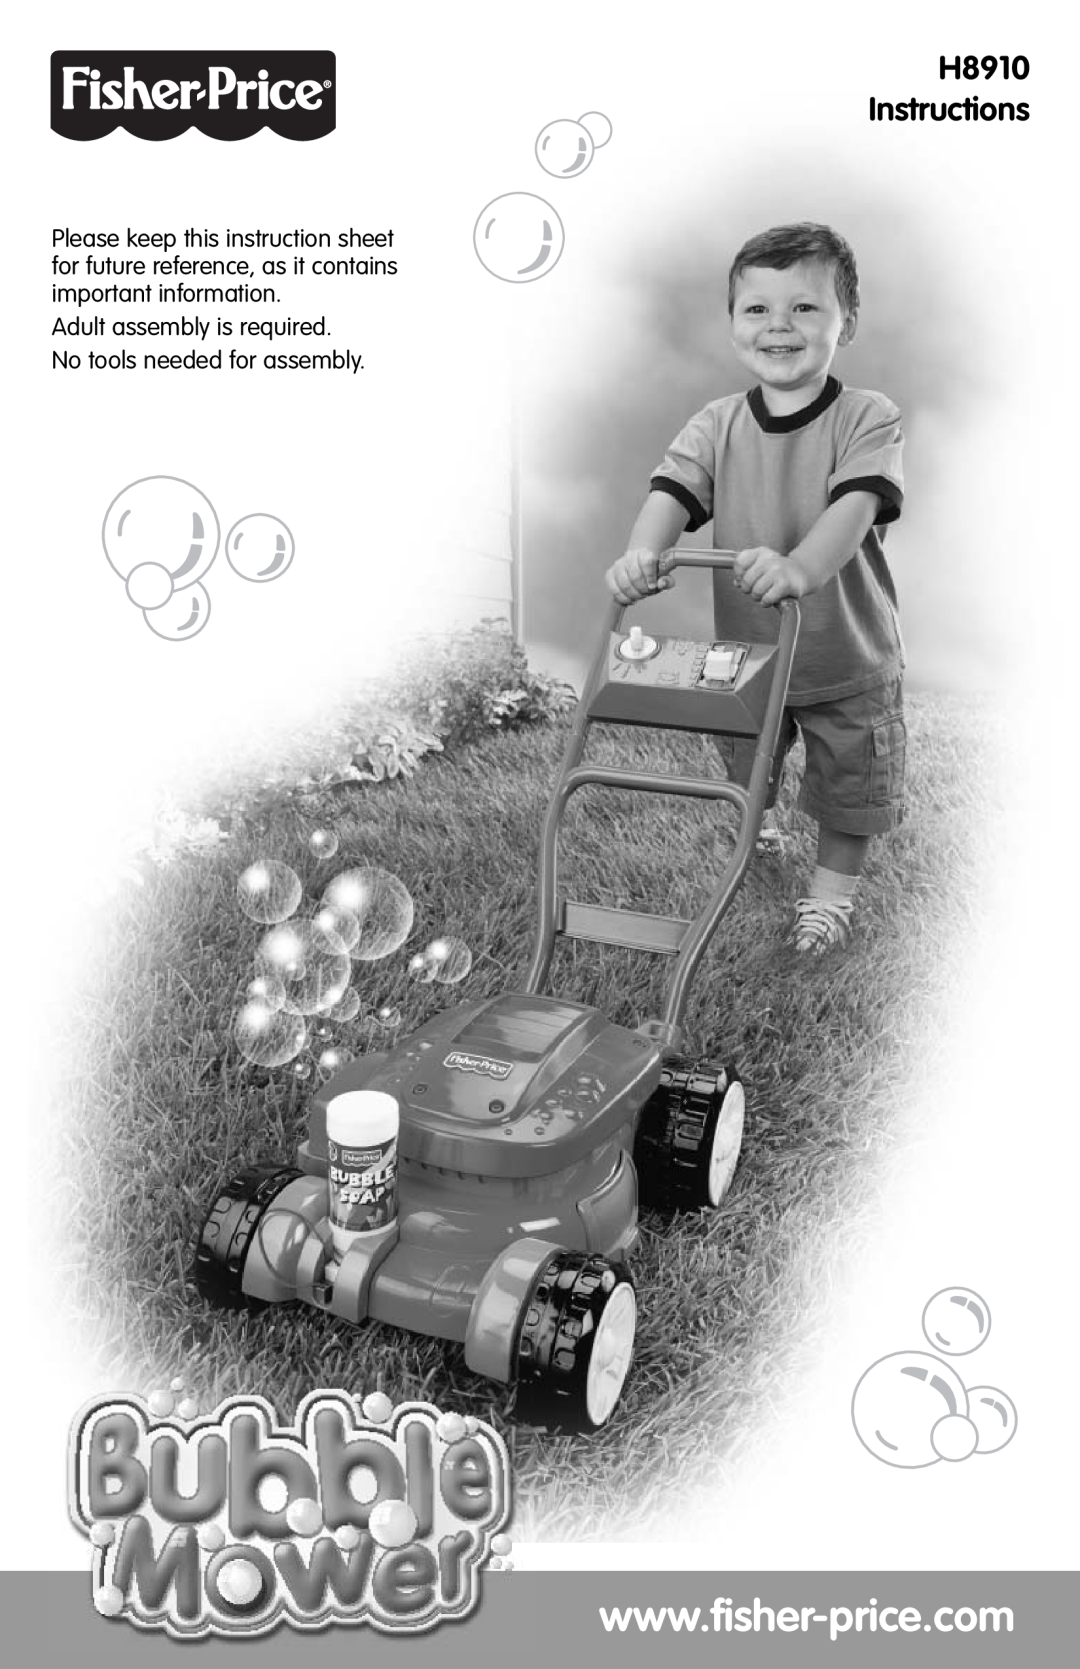 Fisher-Price H8910 instruction sheet Adult assembly is required. No tools needed for assembly 